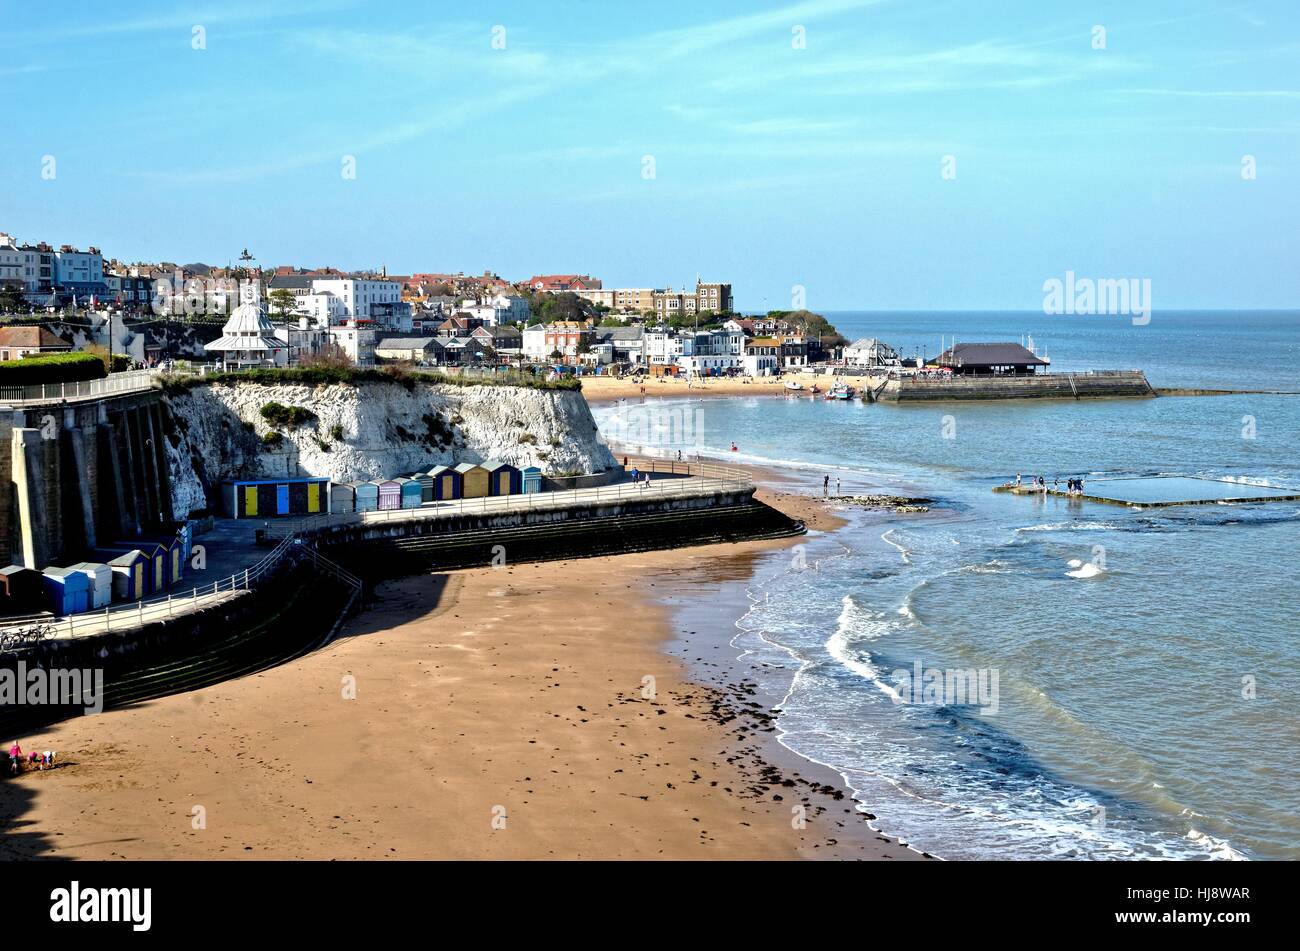 Beach and seafront at Broadstairs Kent UK Stock Photo